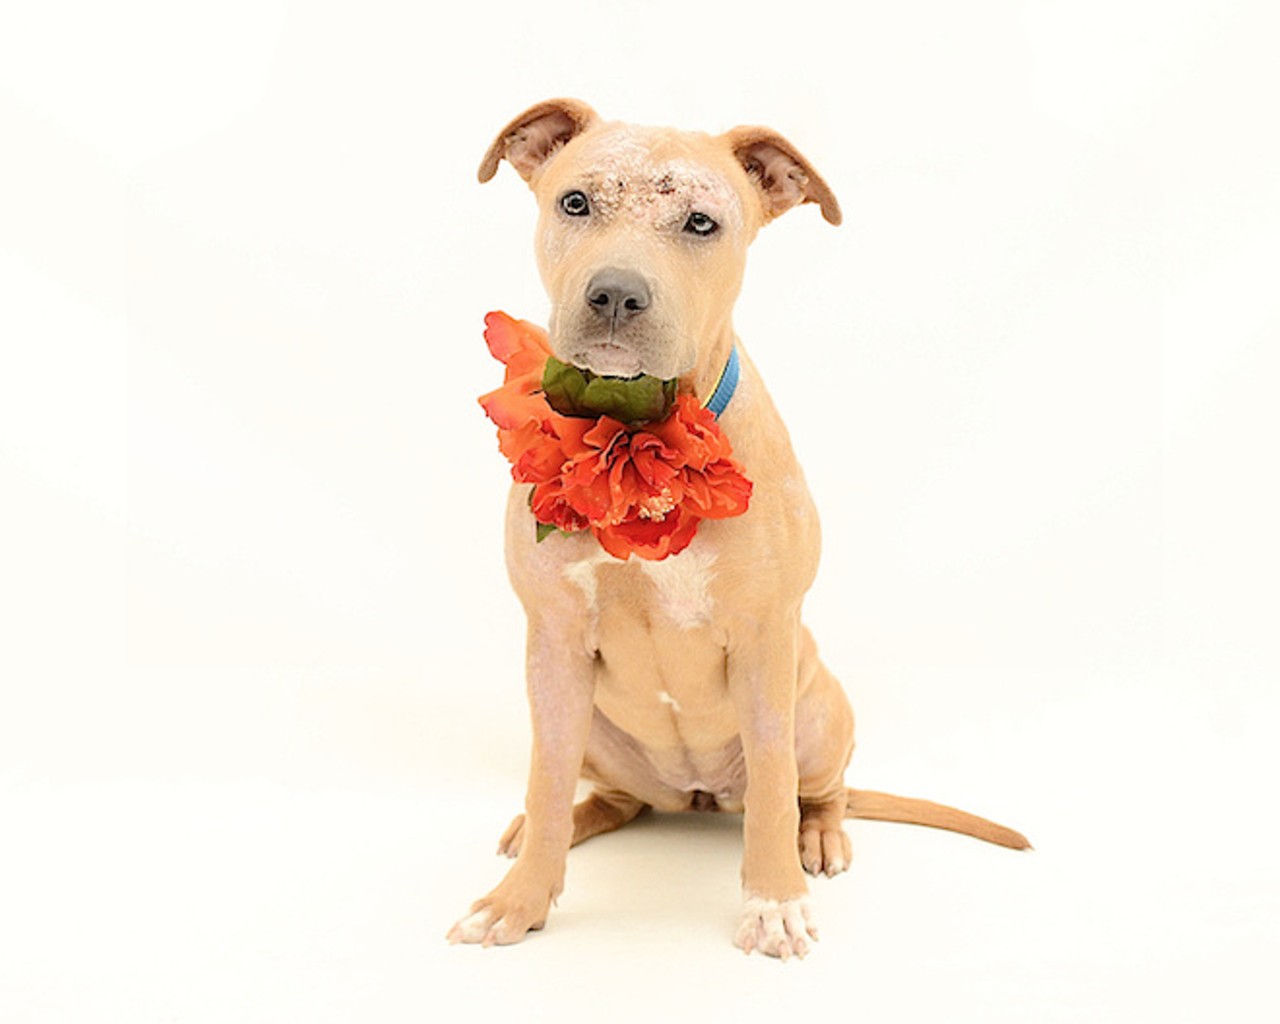 19 adorable adoptable dogs ready to go home with you for the holidays